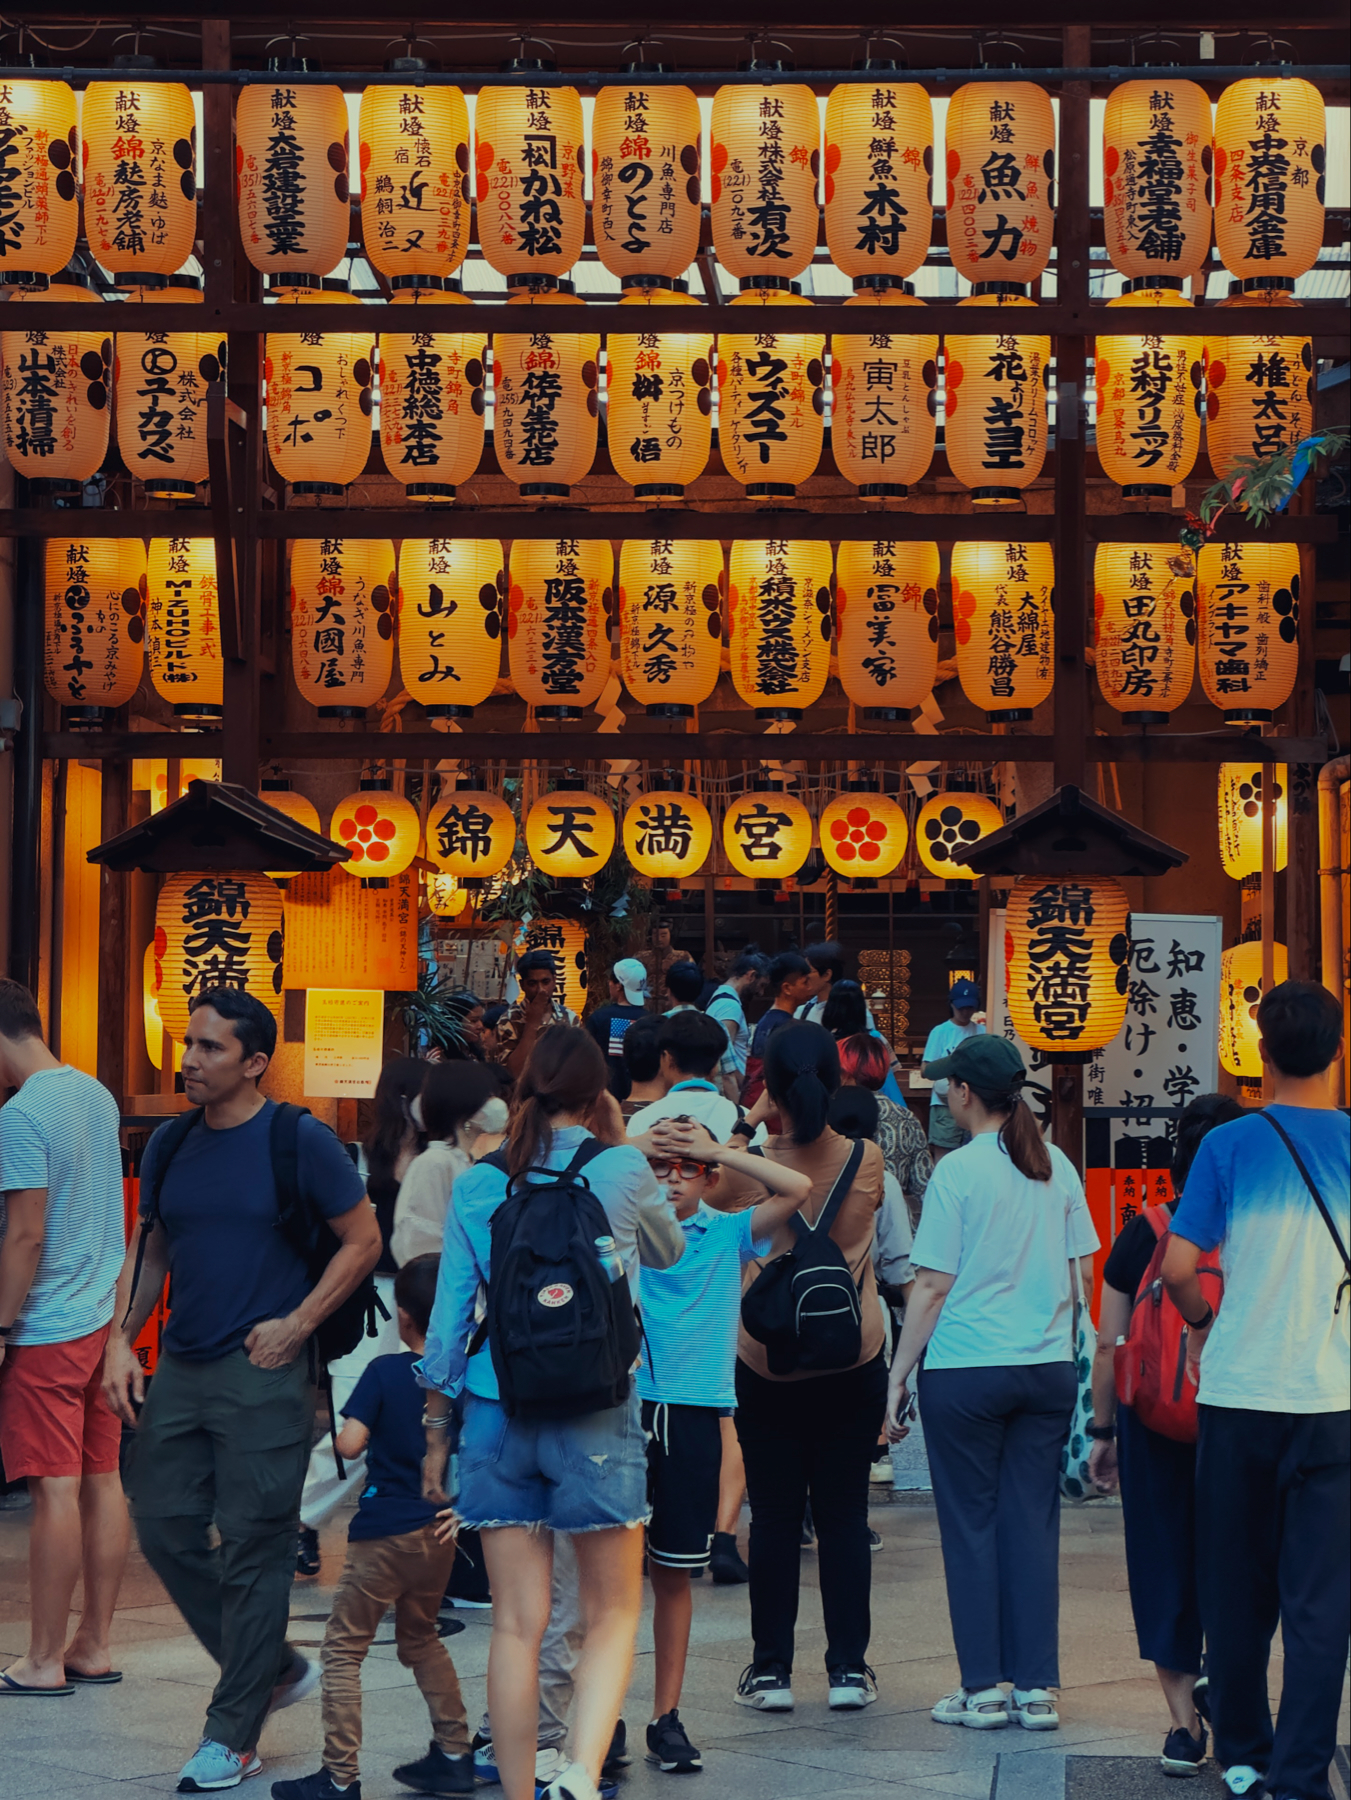 A crowd of people gathered near a Japanese shrine entrance, illuminated by traditional lanterns with Japanese writing.